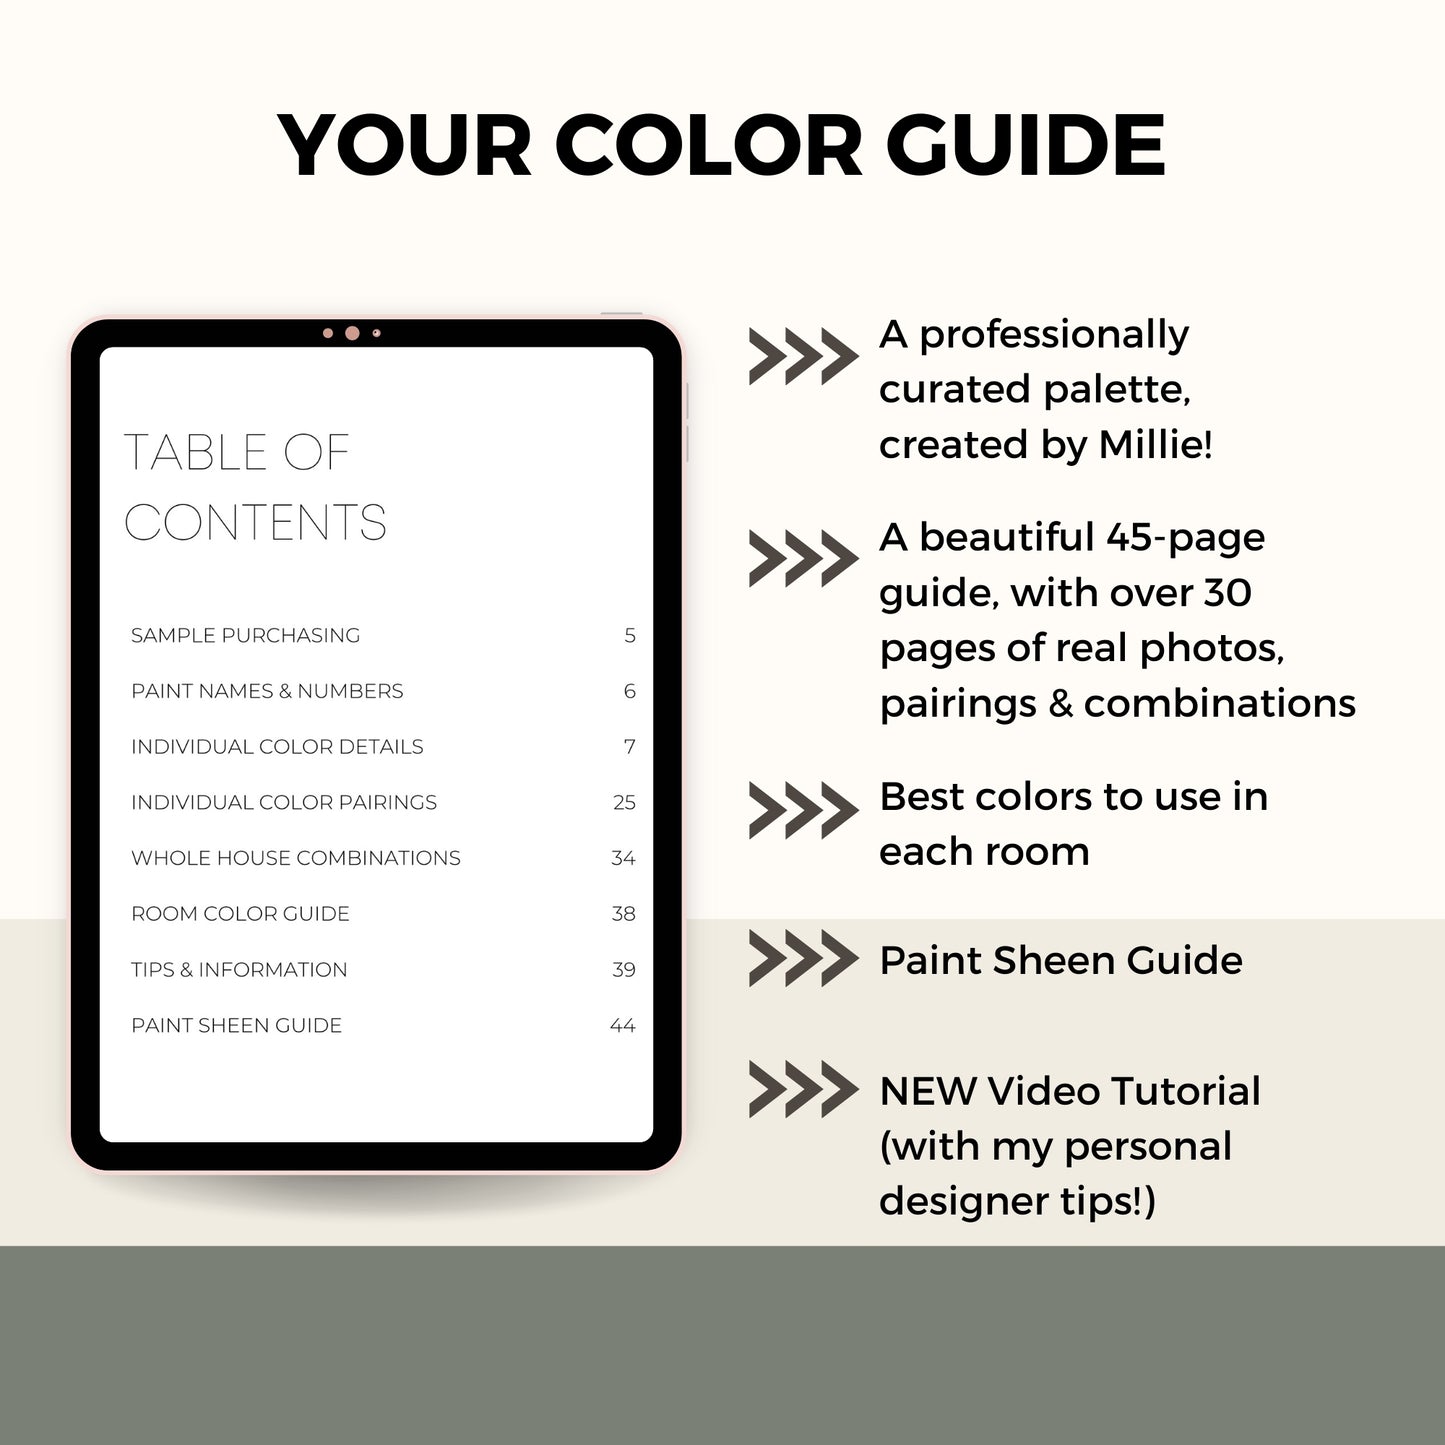 Quiet Luxury Sherwin Williams Paint Palette, Interior Paint Colors for Home, Modern Neutrals, Warm and Cozy, Creamy Compliments, Moody Earth Tones